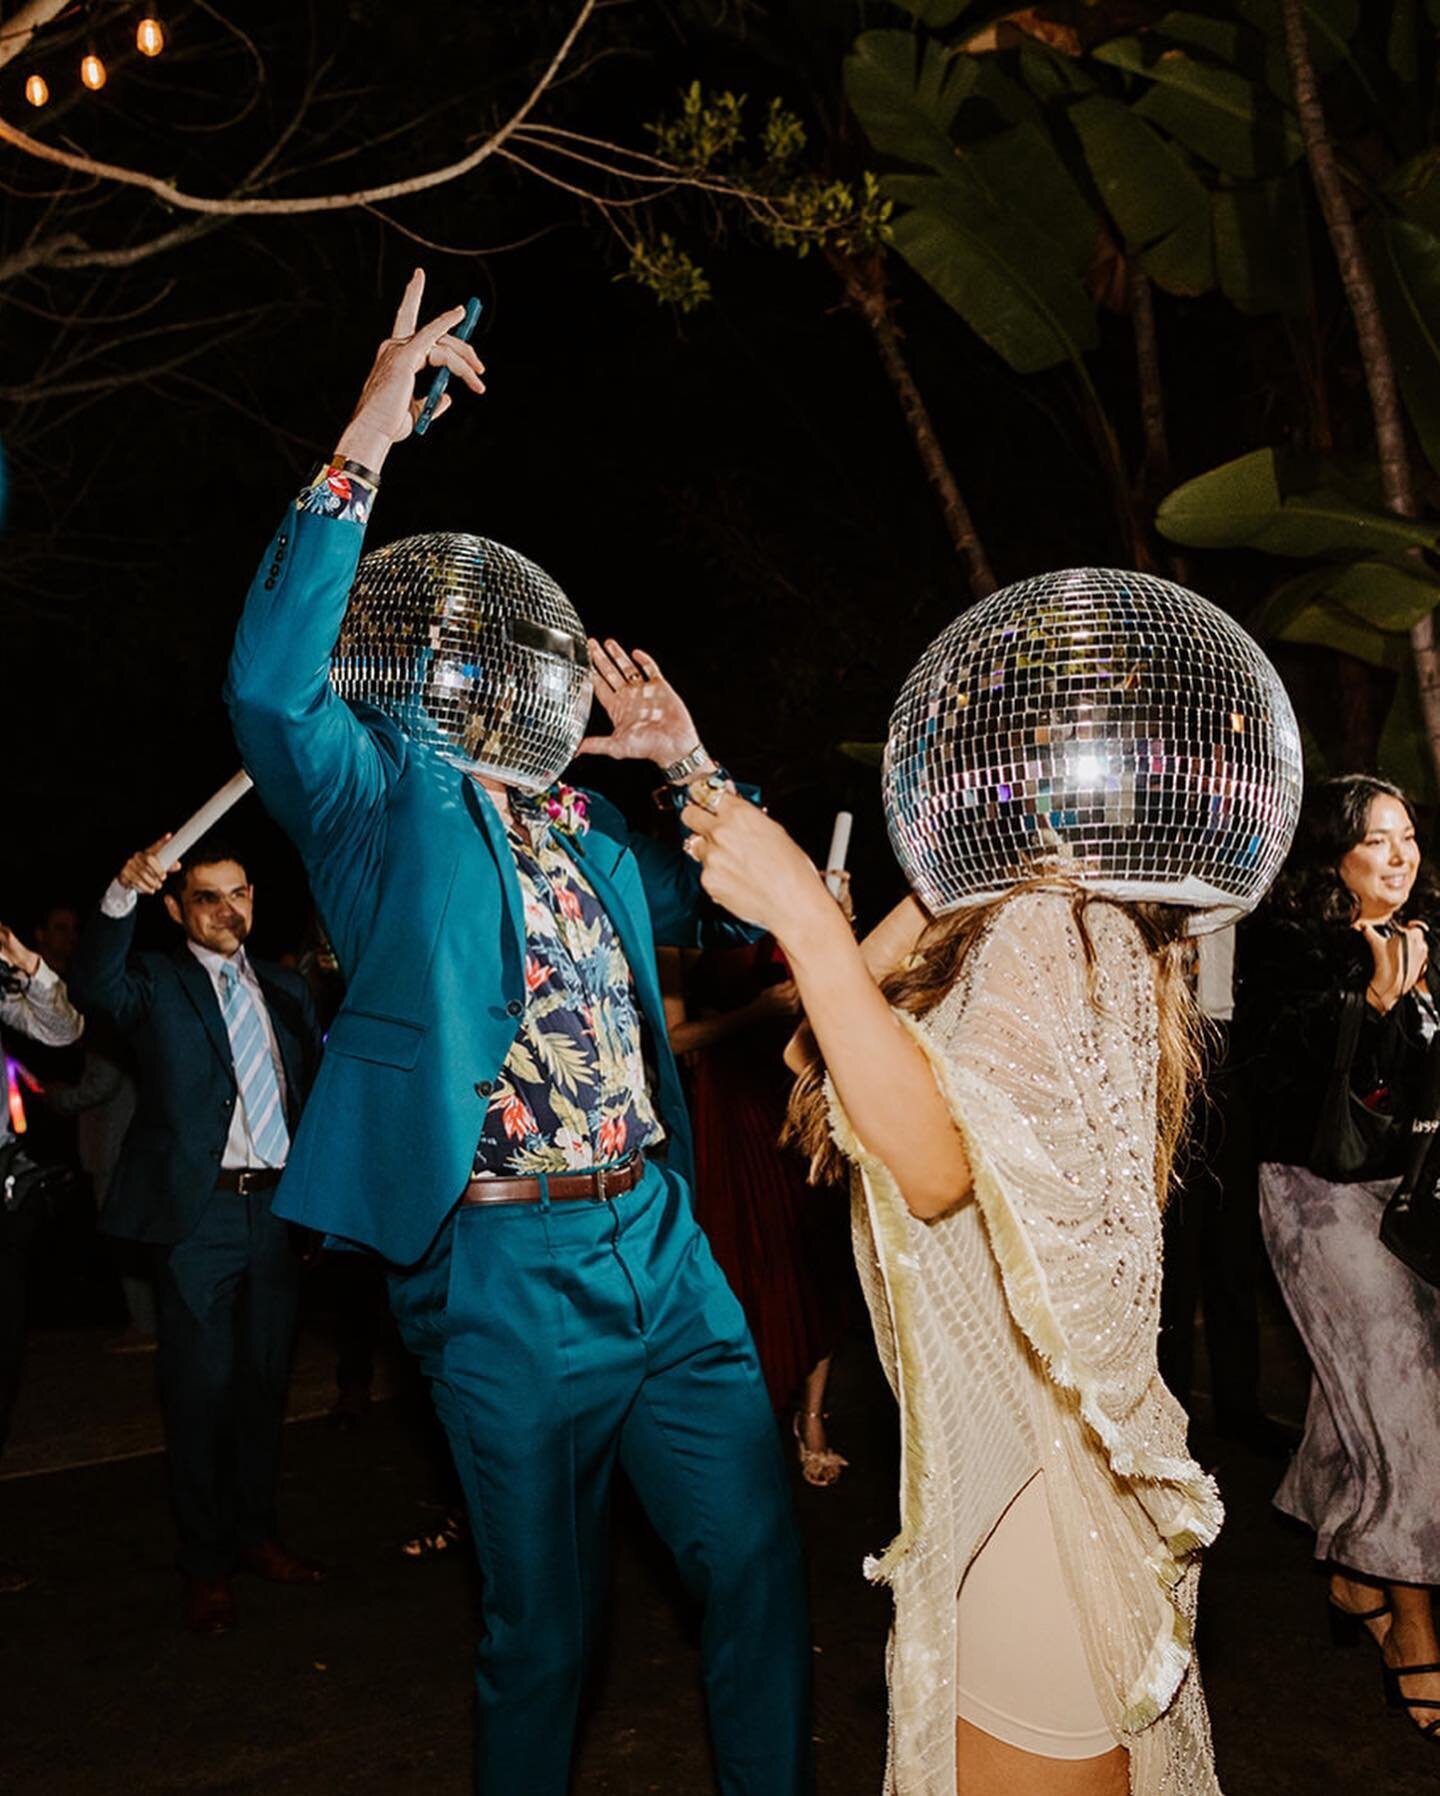 The vibes at Nicky + Cole&rsquo;s wedding were immaculate ✨
A tropical Miami vice disco theme?? Sign me up!

Photography @tidasvy 
Planning @steadfastevents 
Venue @botanicathevenue 
Floral @simplyadinafloral